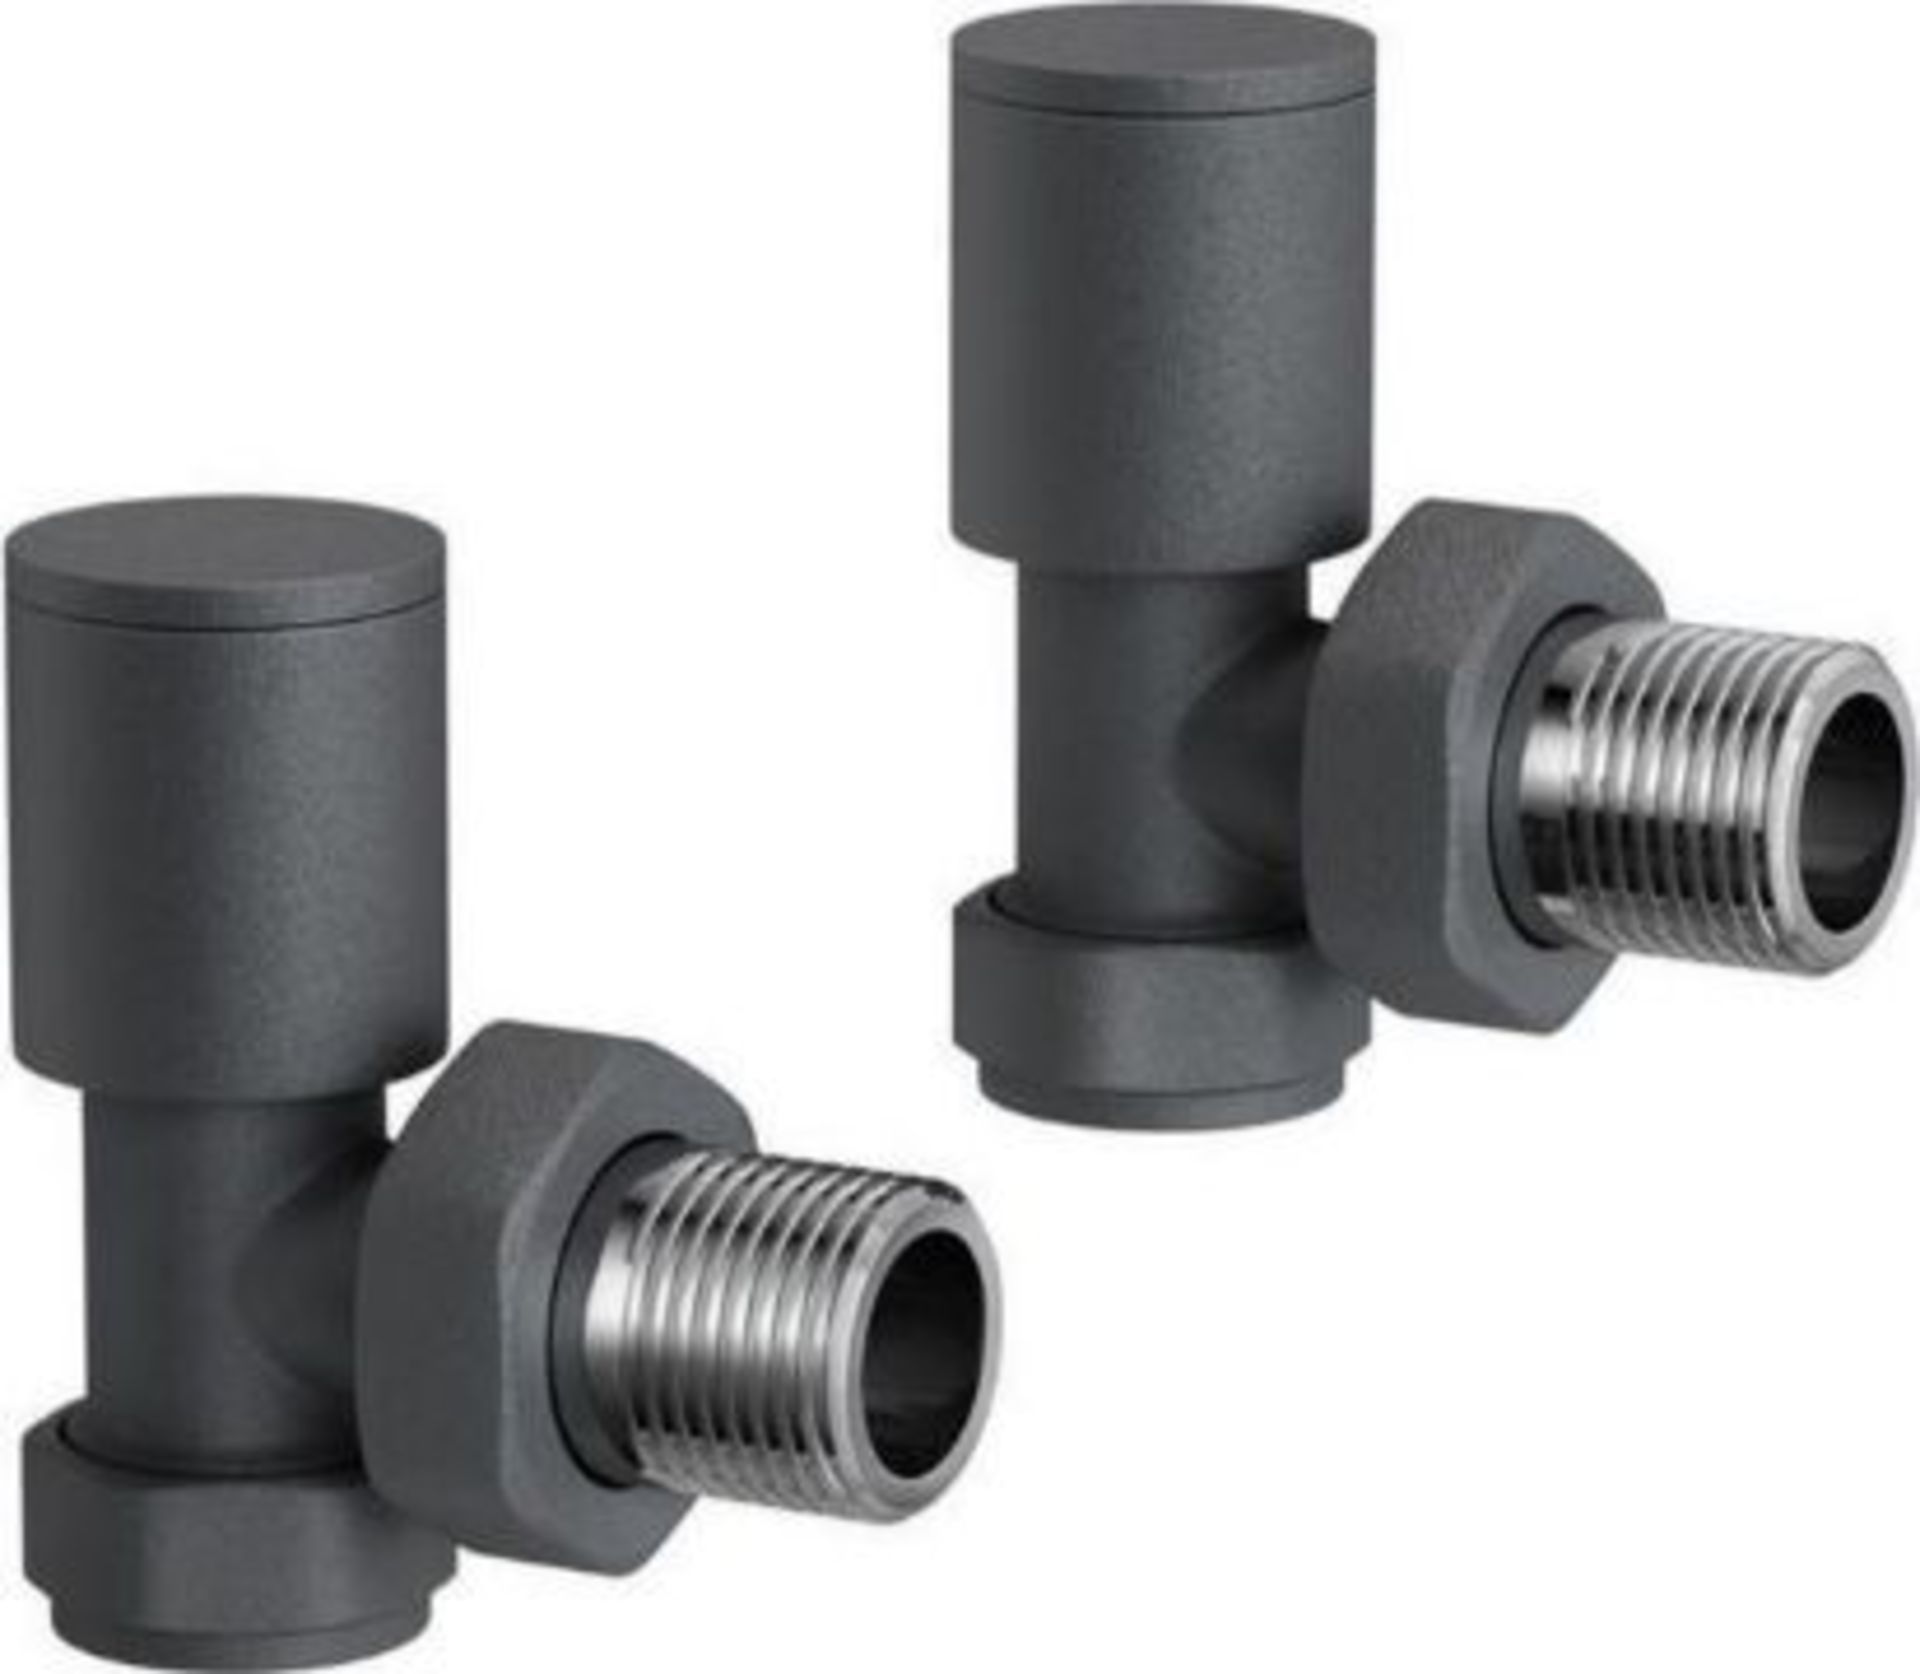 New & Boxed 15 mm Standard Connection Round Angled Anthracite Radiator Valves. Ra03A. Complie